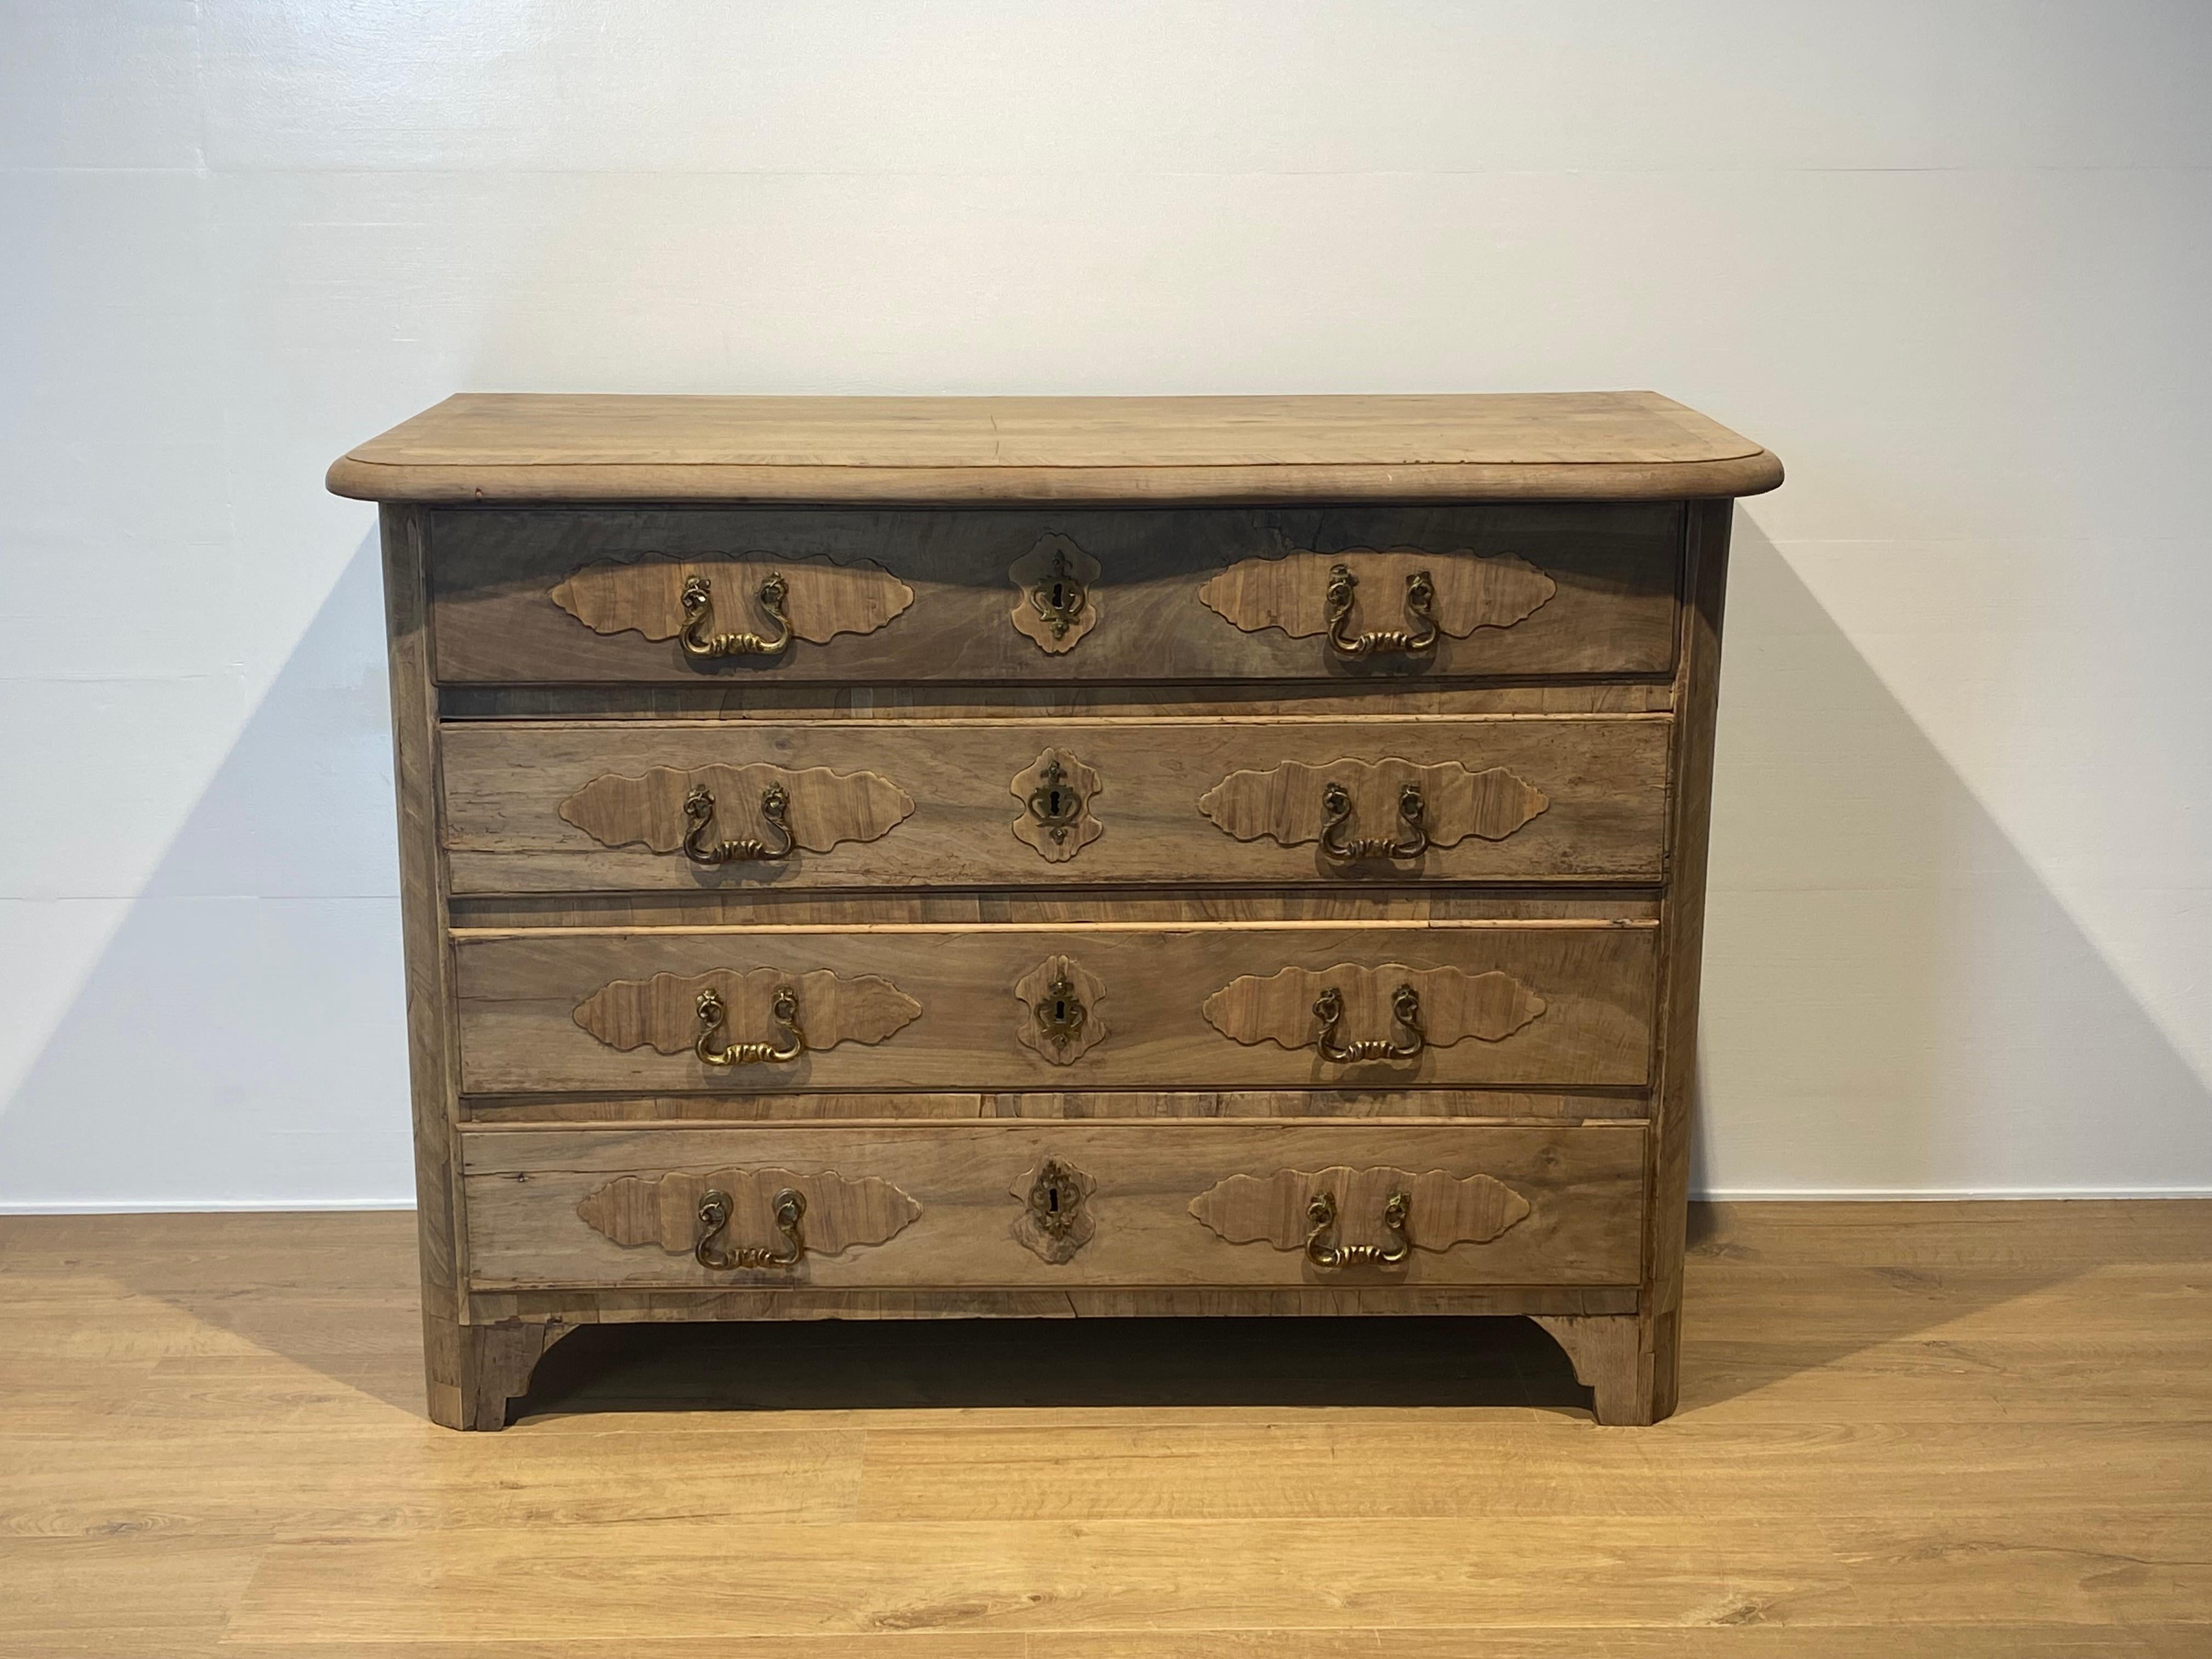 Elegant antique Italian Commode in a beautiful bleached Walnut,
from the Tuscany Region, 18 th Century,Italy,
the chest of drawers has a simple but elegant and refined design,
original ironwork, the table top is in a sumptuous Walnut wood,
beautiful